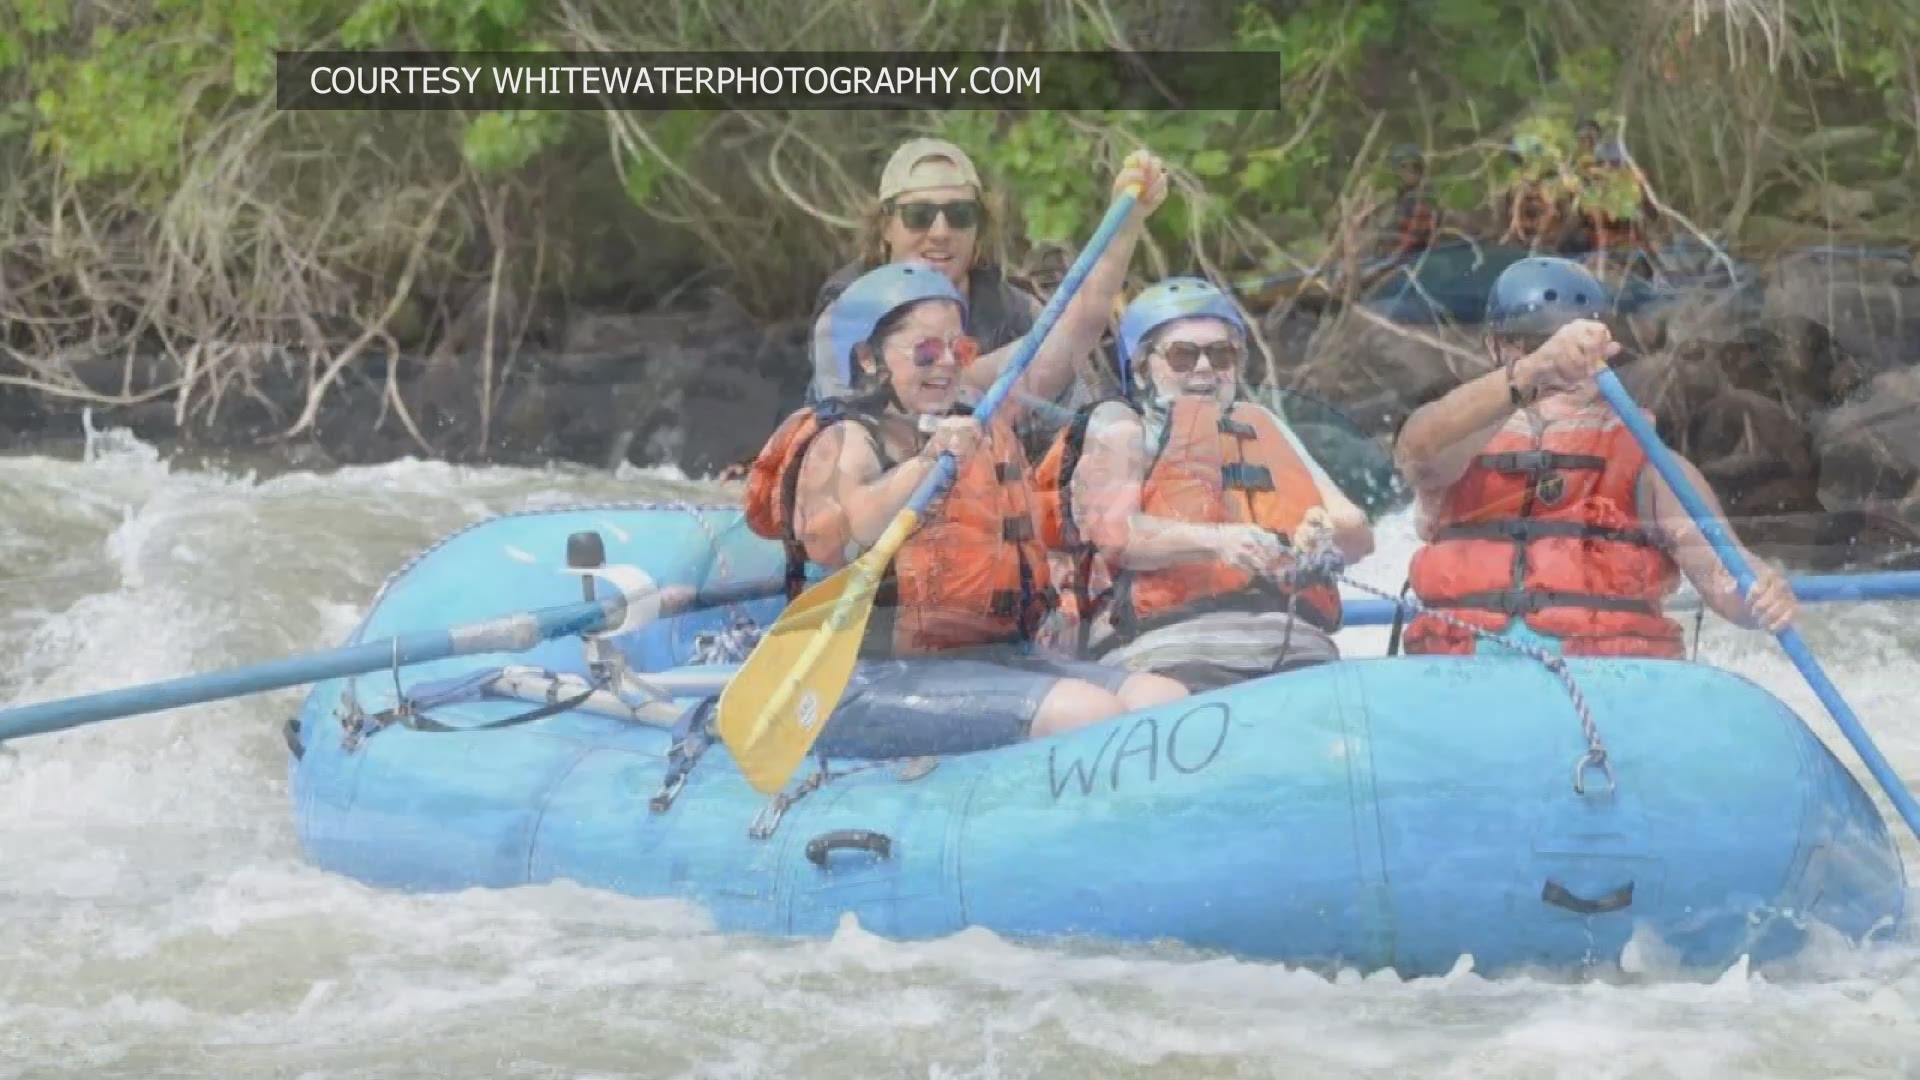 Deanna Maxwell crossed white water rafting off her bucket list this past weekend.